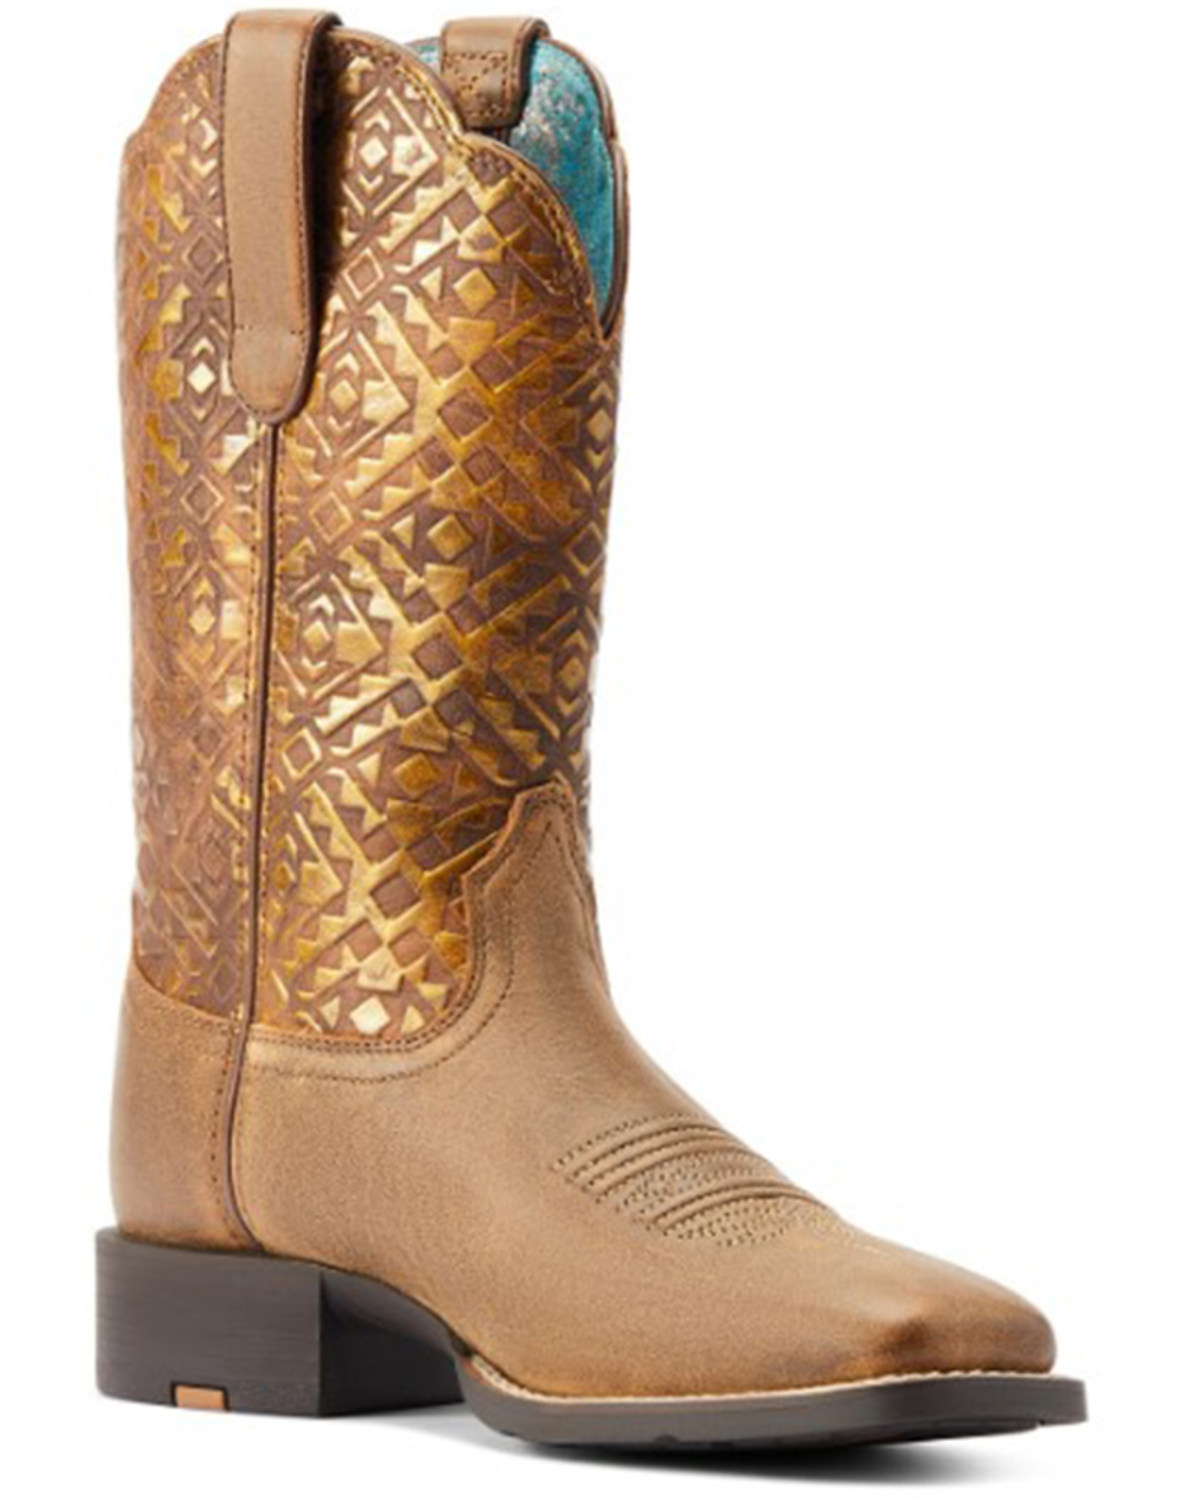 Ariat Women's Round Up Western Performance Boots - Broad Square Toe